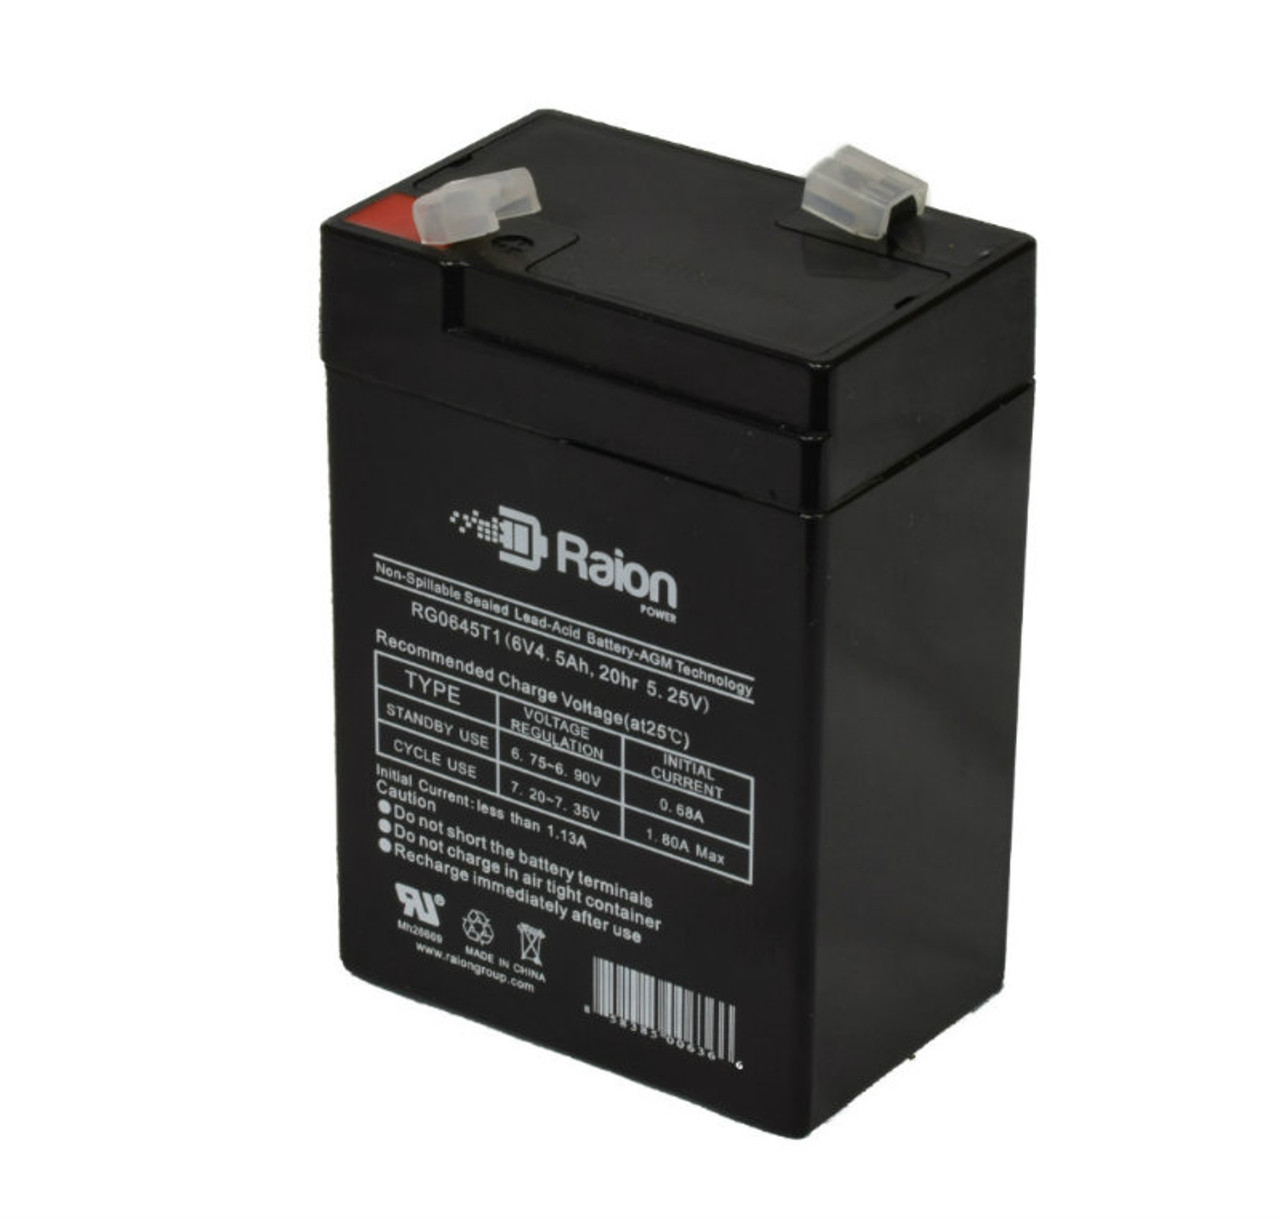 Raion Power RG0645T1 6V 4.5Ah Replacement Battery Cartridge for Weida HX6-4